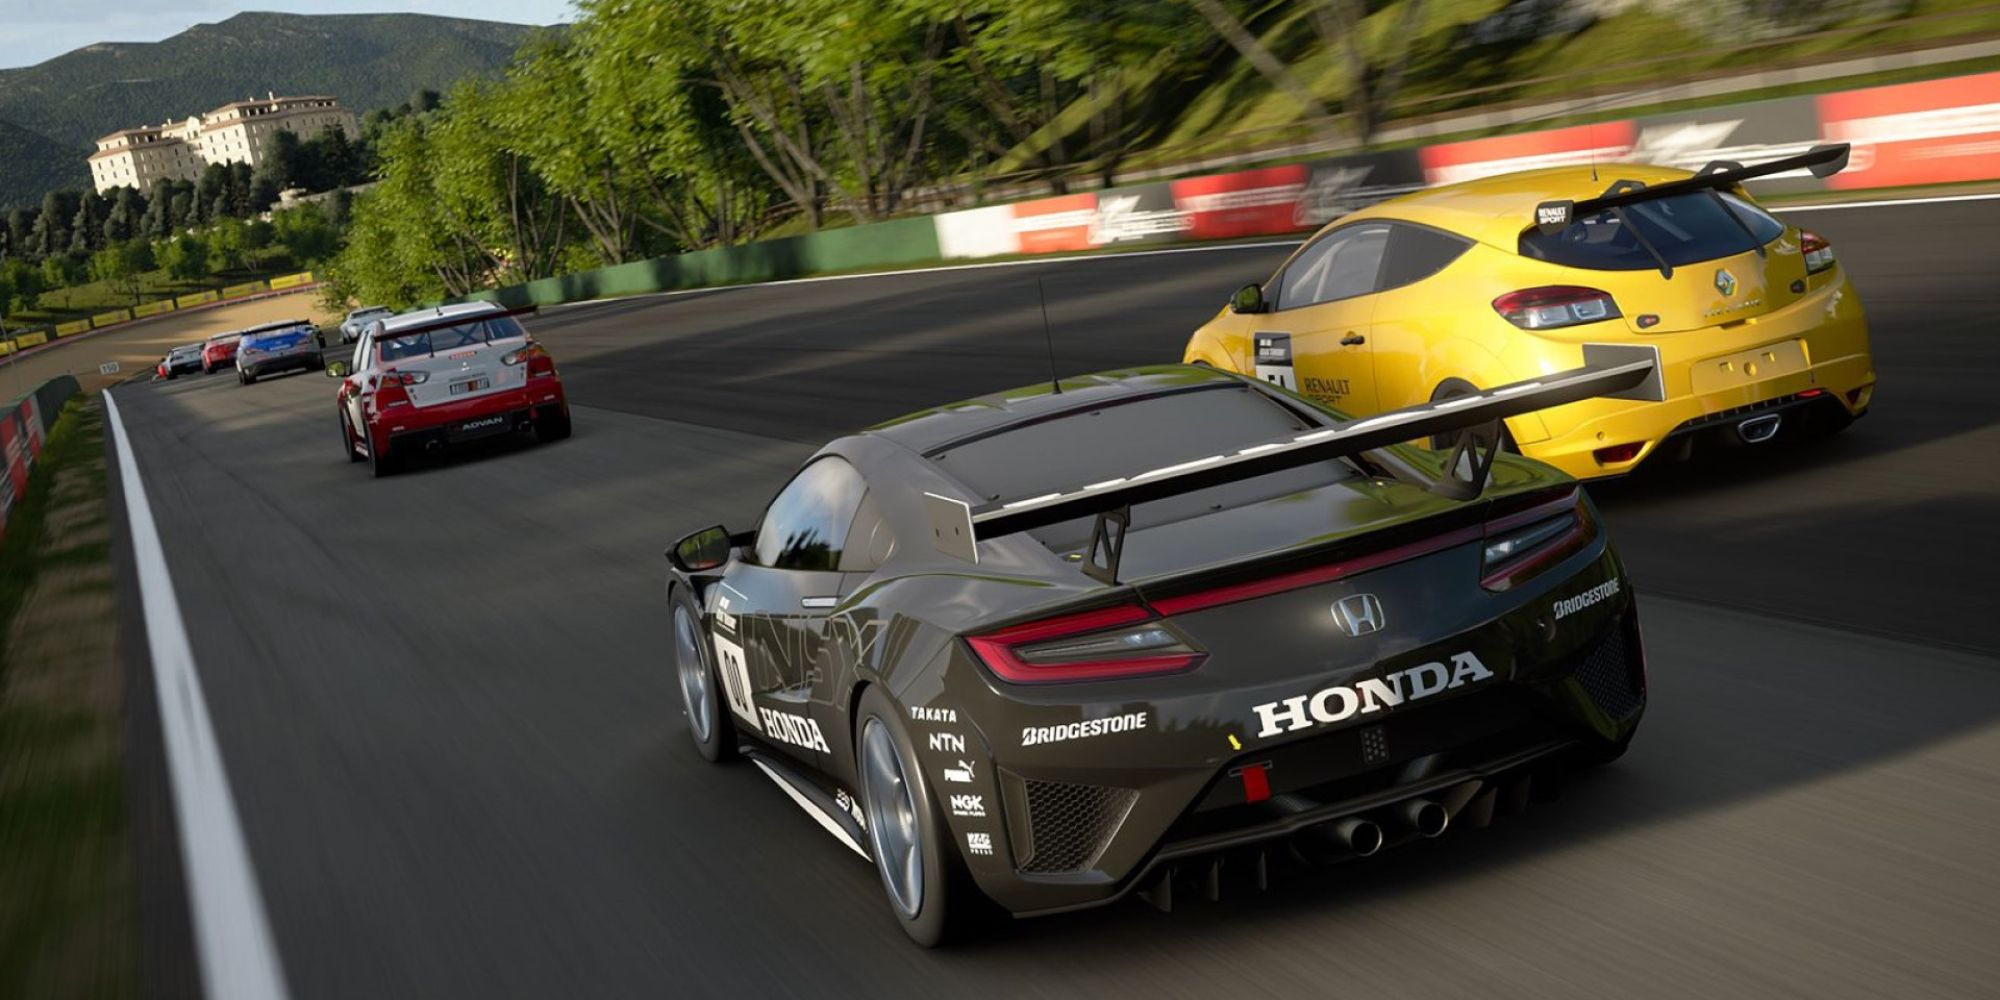 A number of different cars racing in Gran Turismo 7